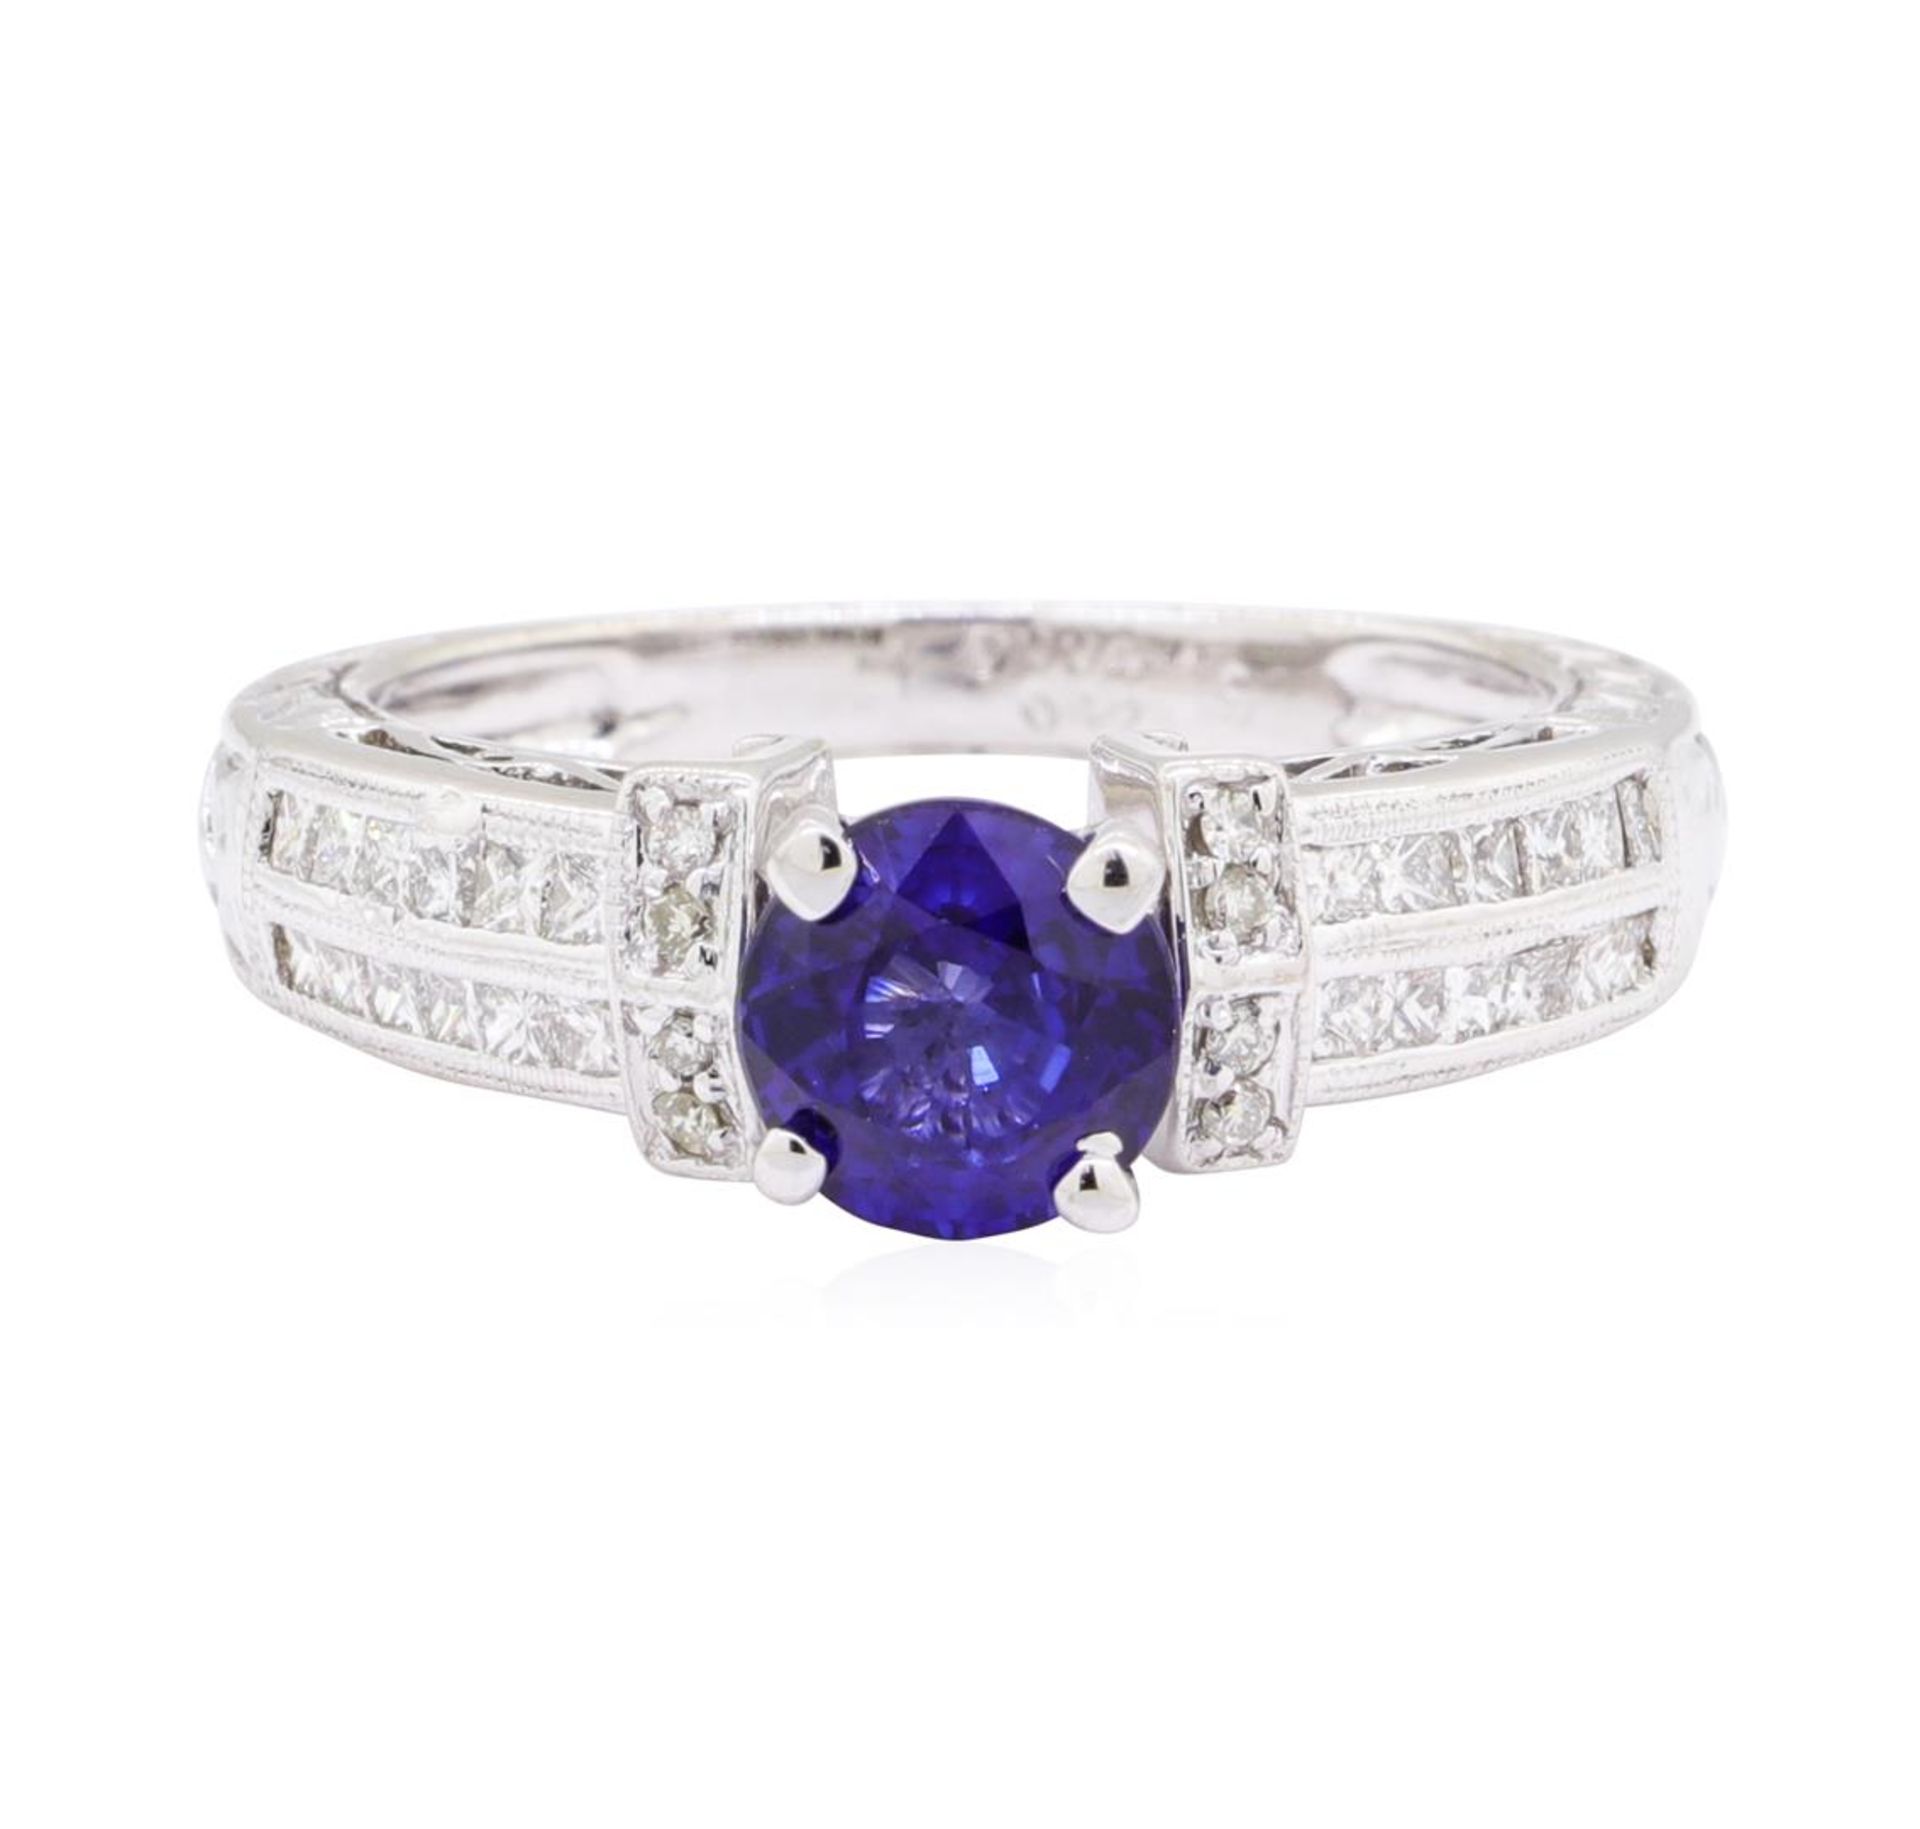 1.36 ctw Sapphire and Diamond Ring - 14KT White Gold - Image 2 of 4